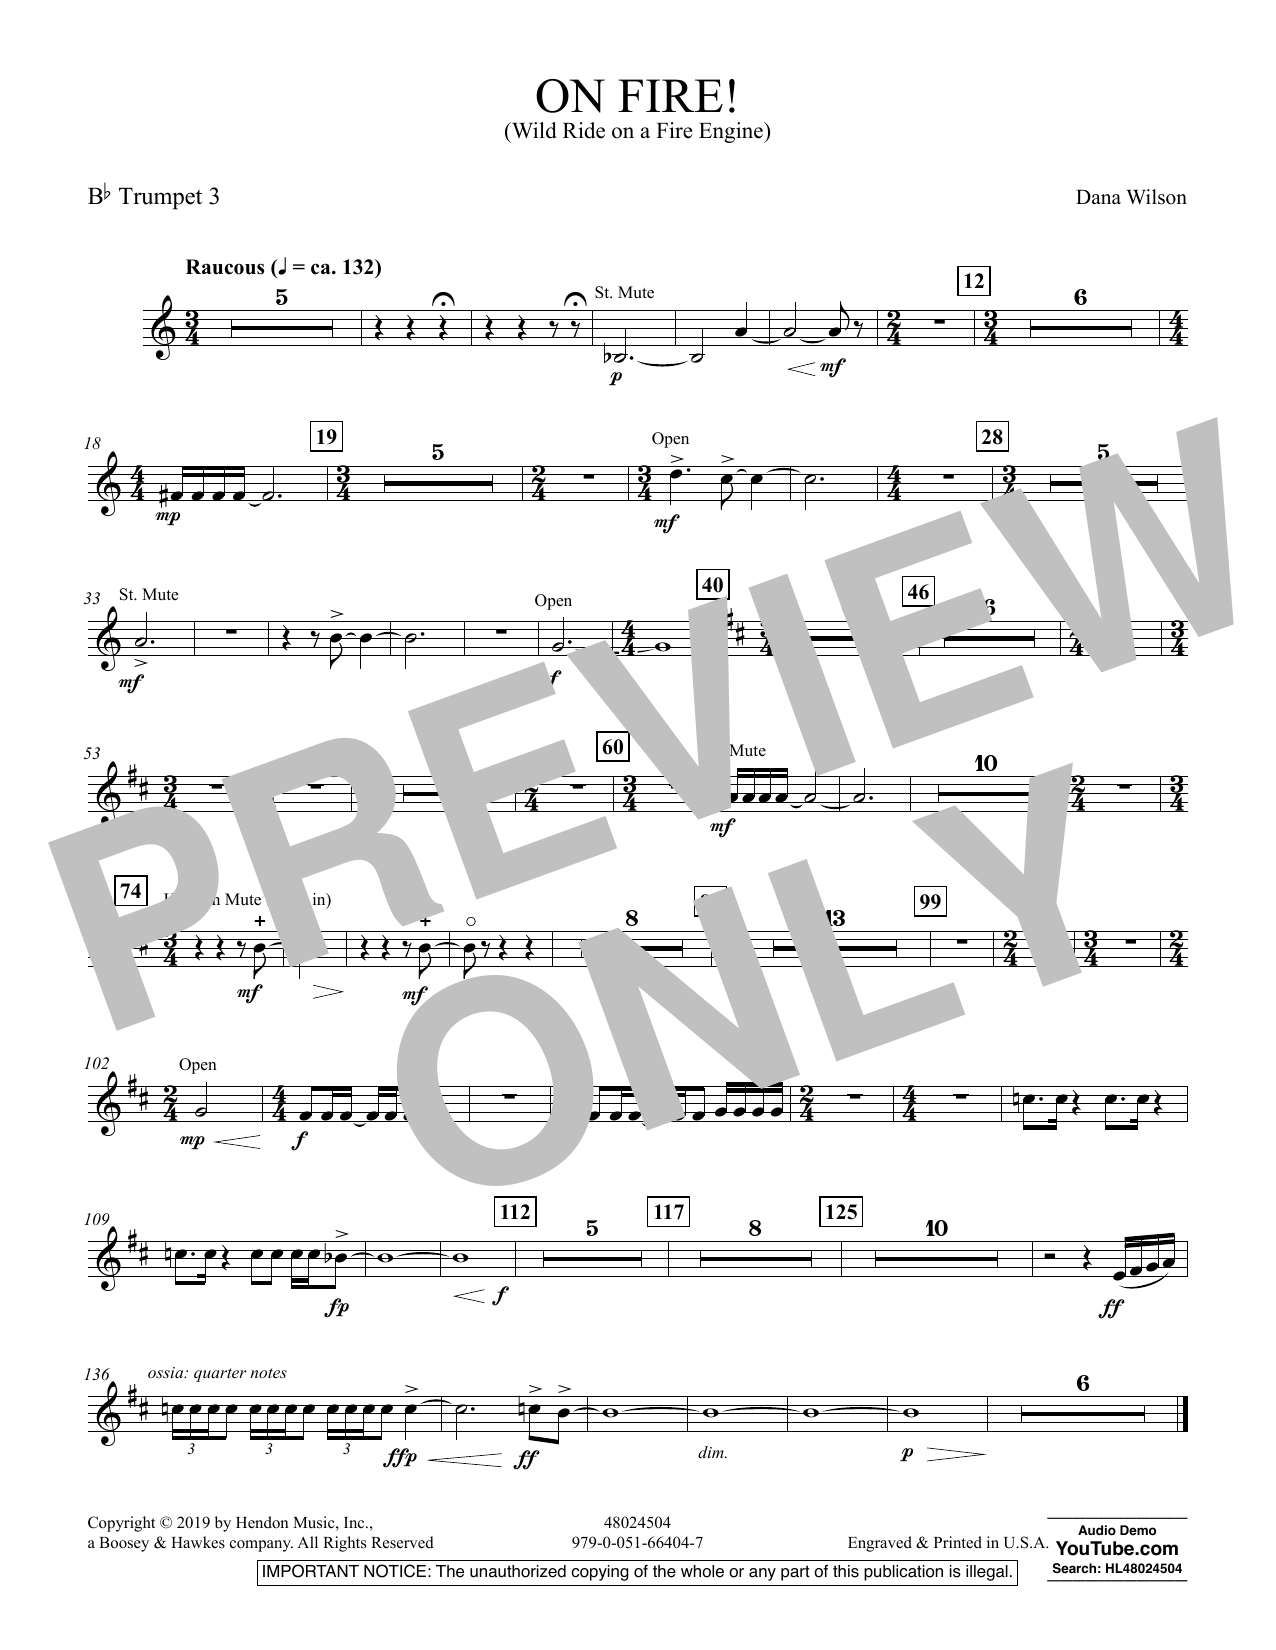 Dana Wilson On Fire! (Wild Ride on a Fire Engine) - Bb Trumpet 3 sheet music preview music notes and score for Concert Band including 1 page(s)